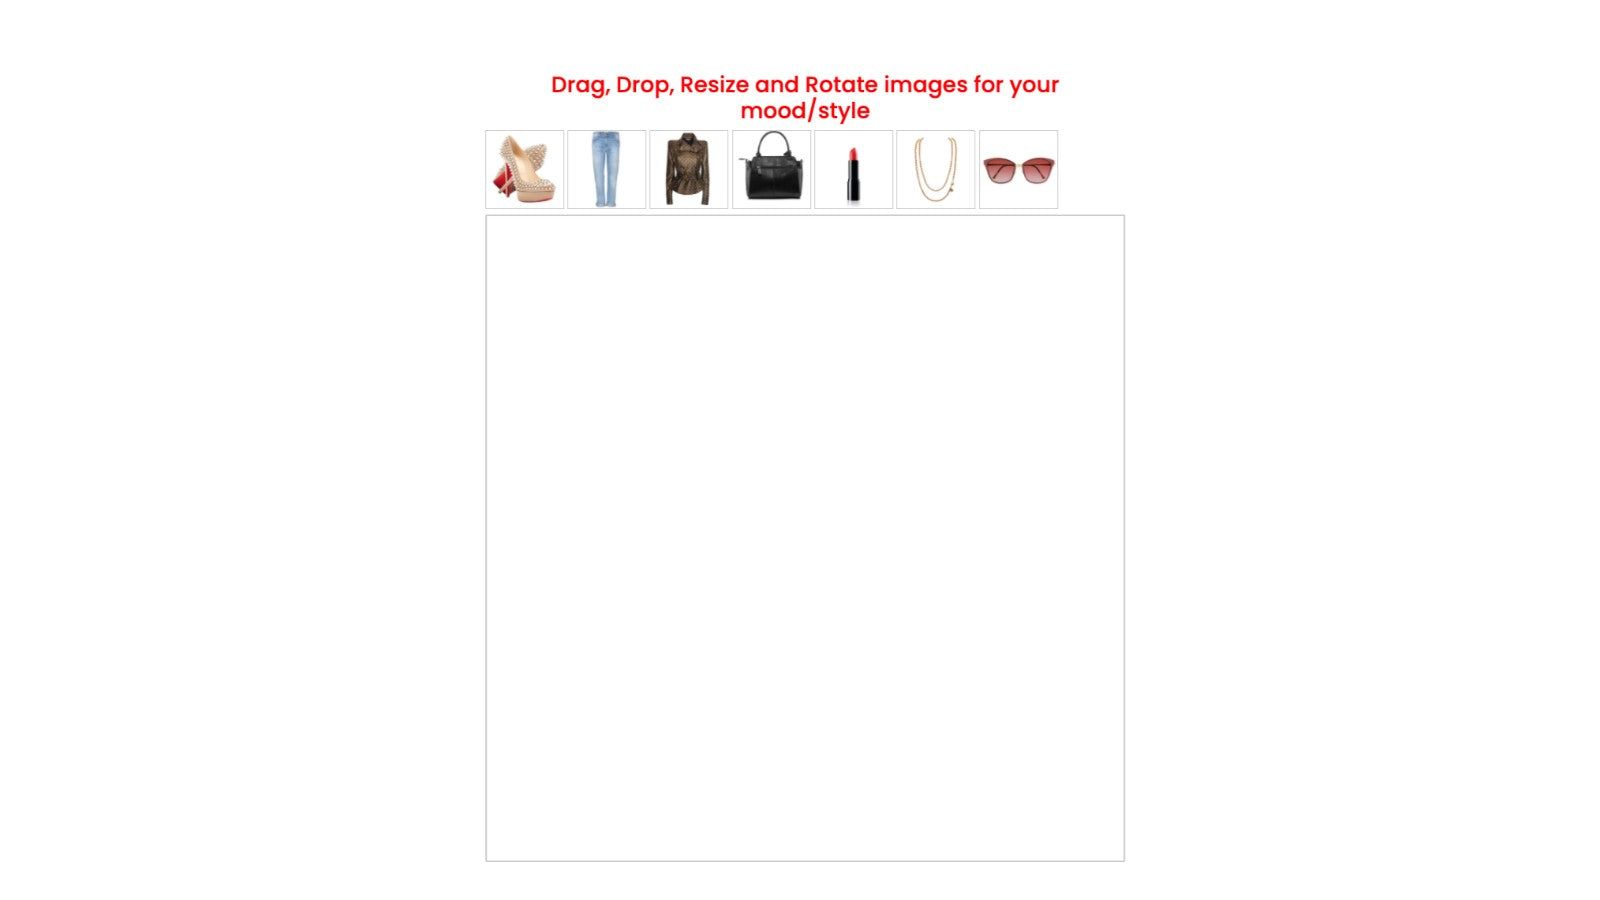 Drag, Drop, Resize and Rotate images for mood board page.